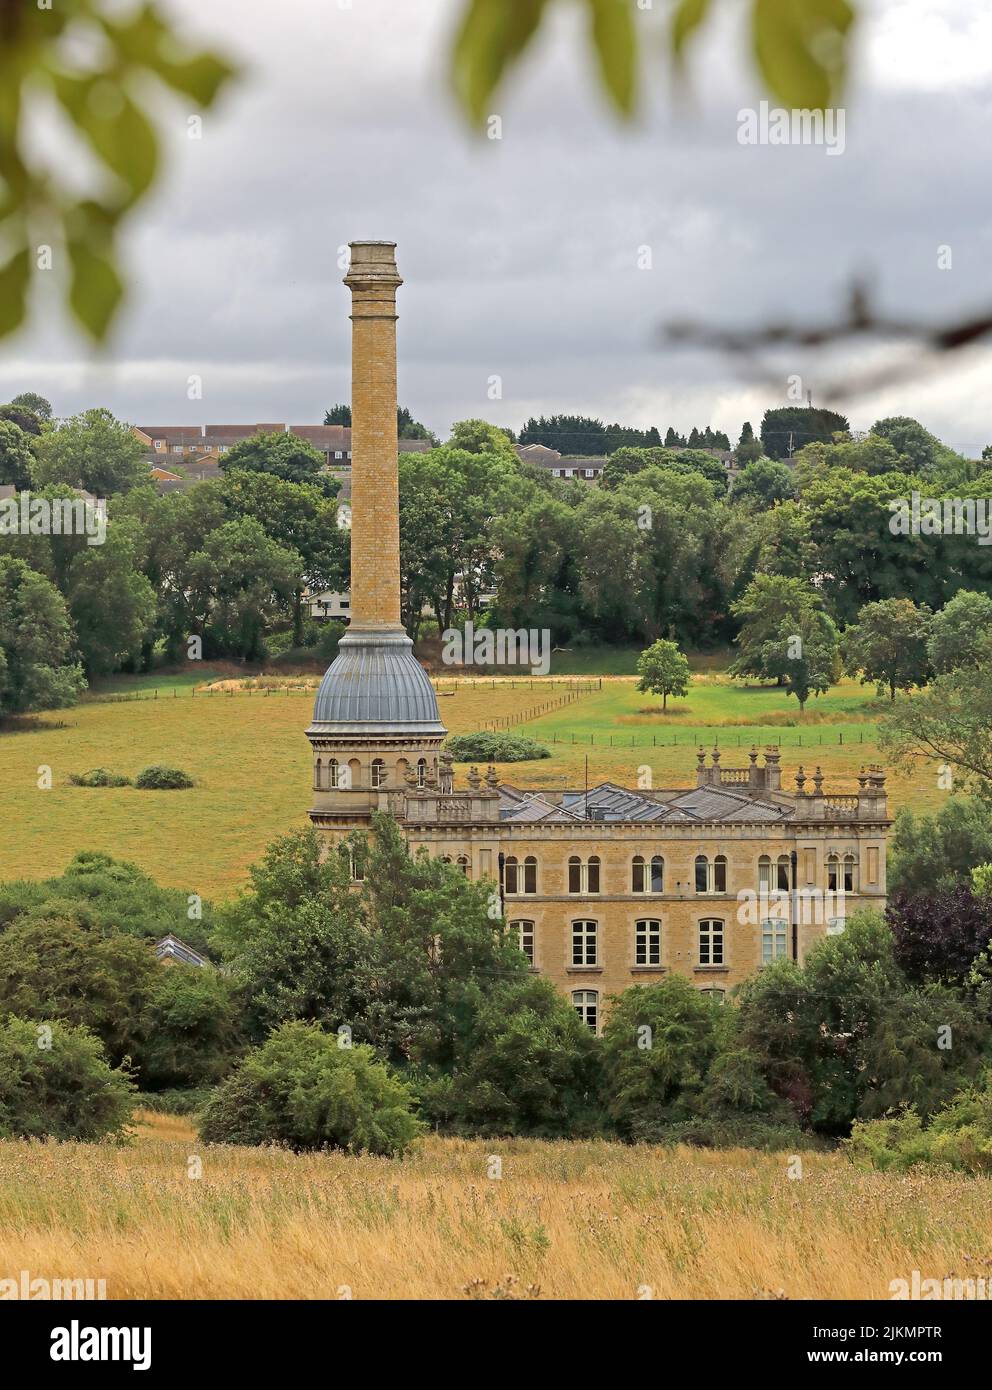 Bliss Historic Tweed Mill, Chipping Norton, Cotswolds, Gloucestershire, Inghilterra, REGNO UNITO Foto Stock